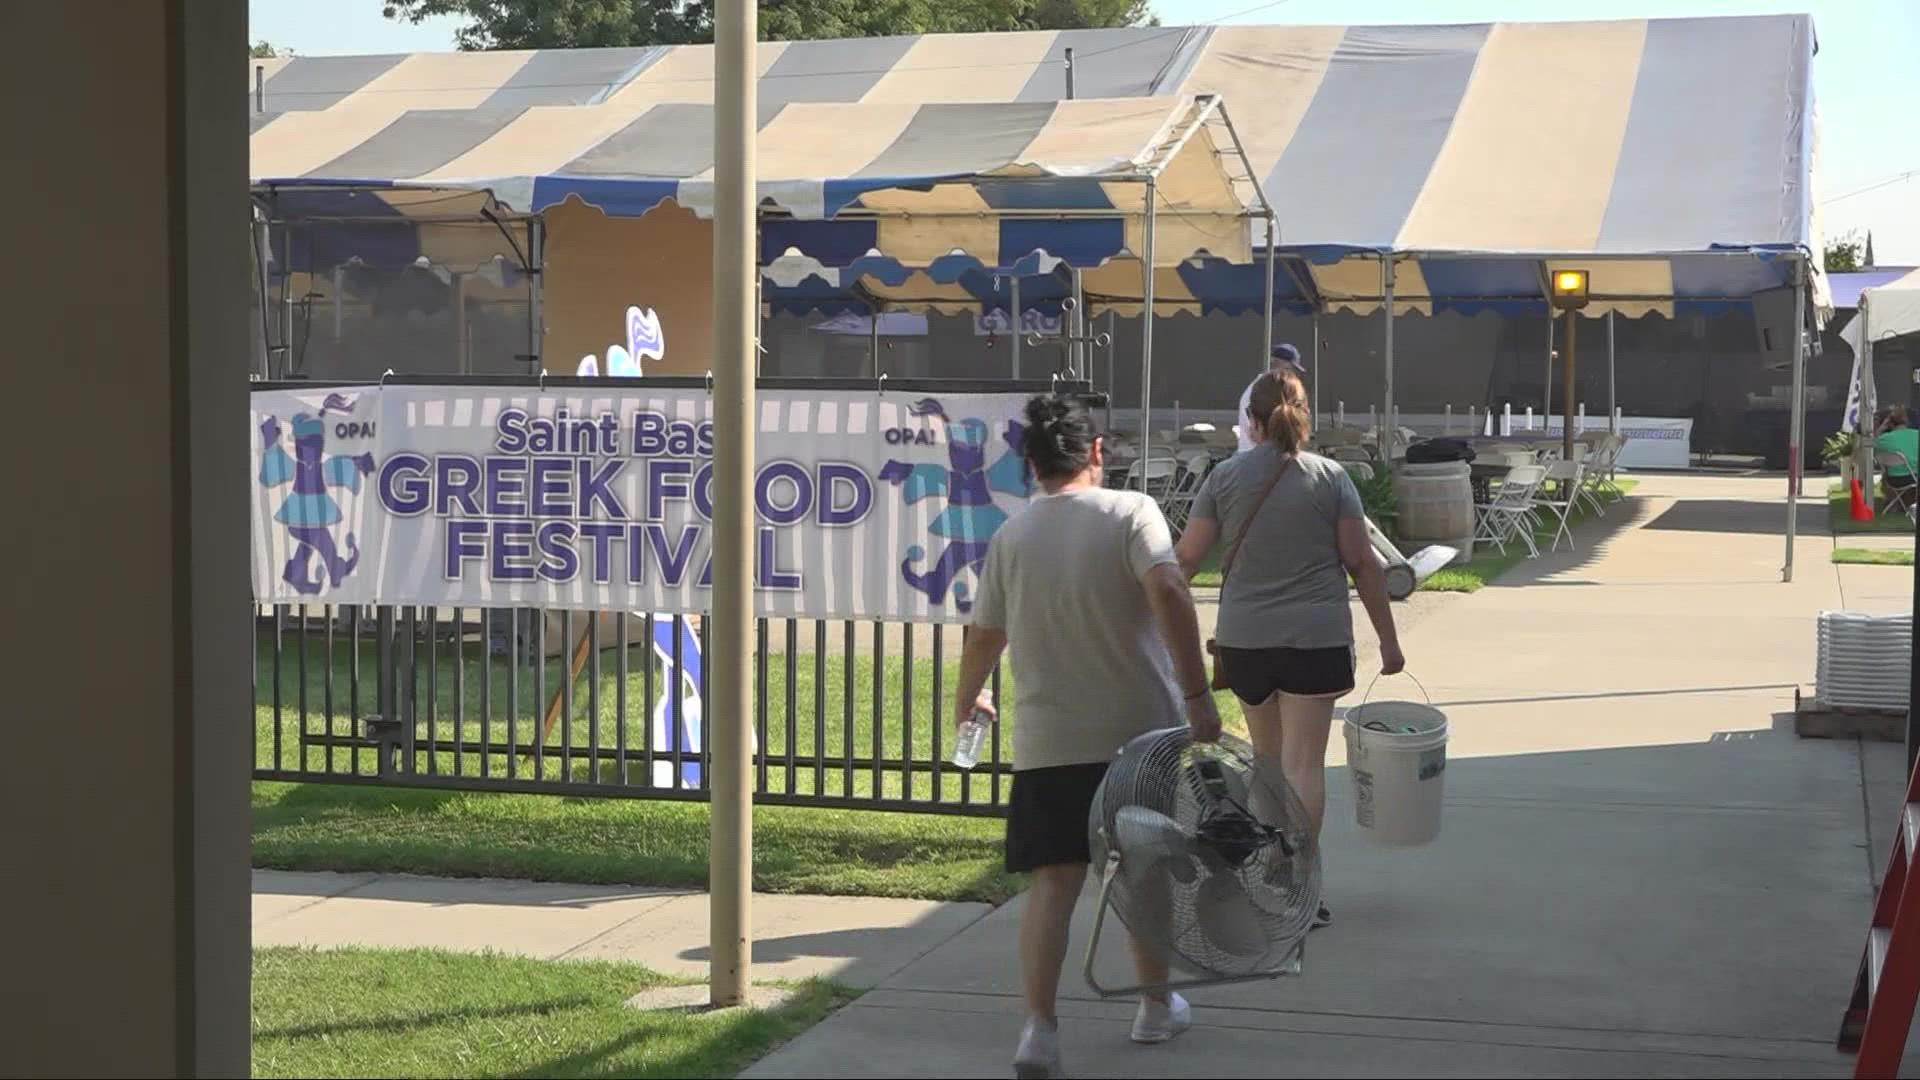 From the Brew Fest happening downtown to the Greek Festival happening in central Stockton, the city is preparing for a weekend full of events.